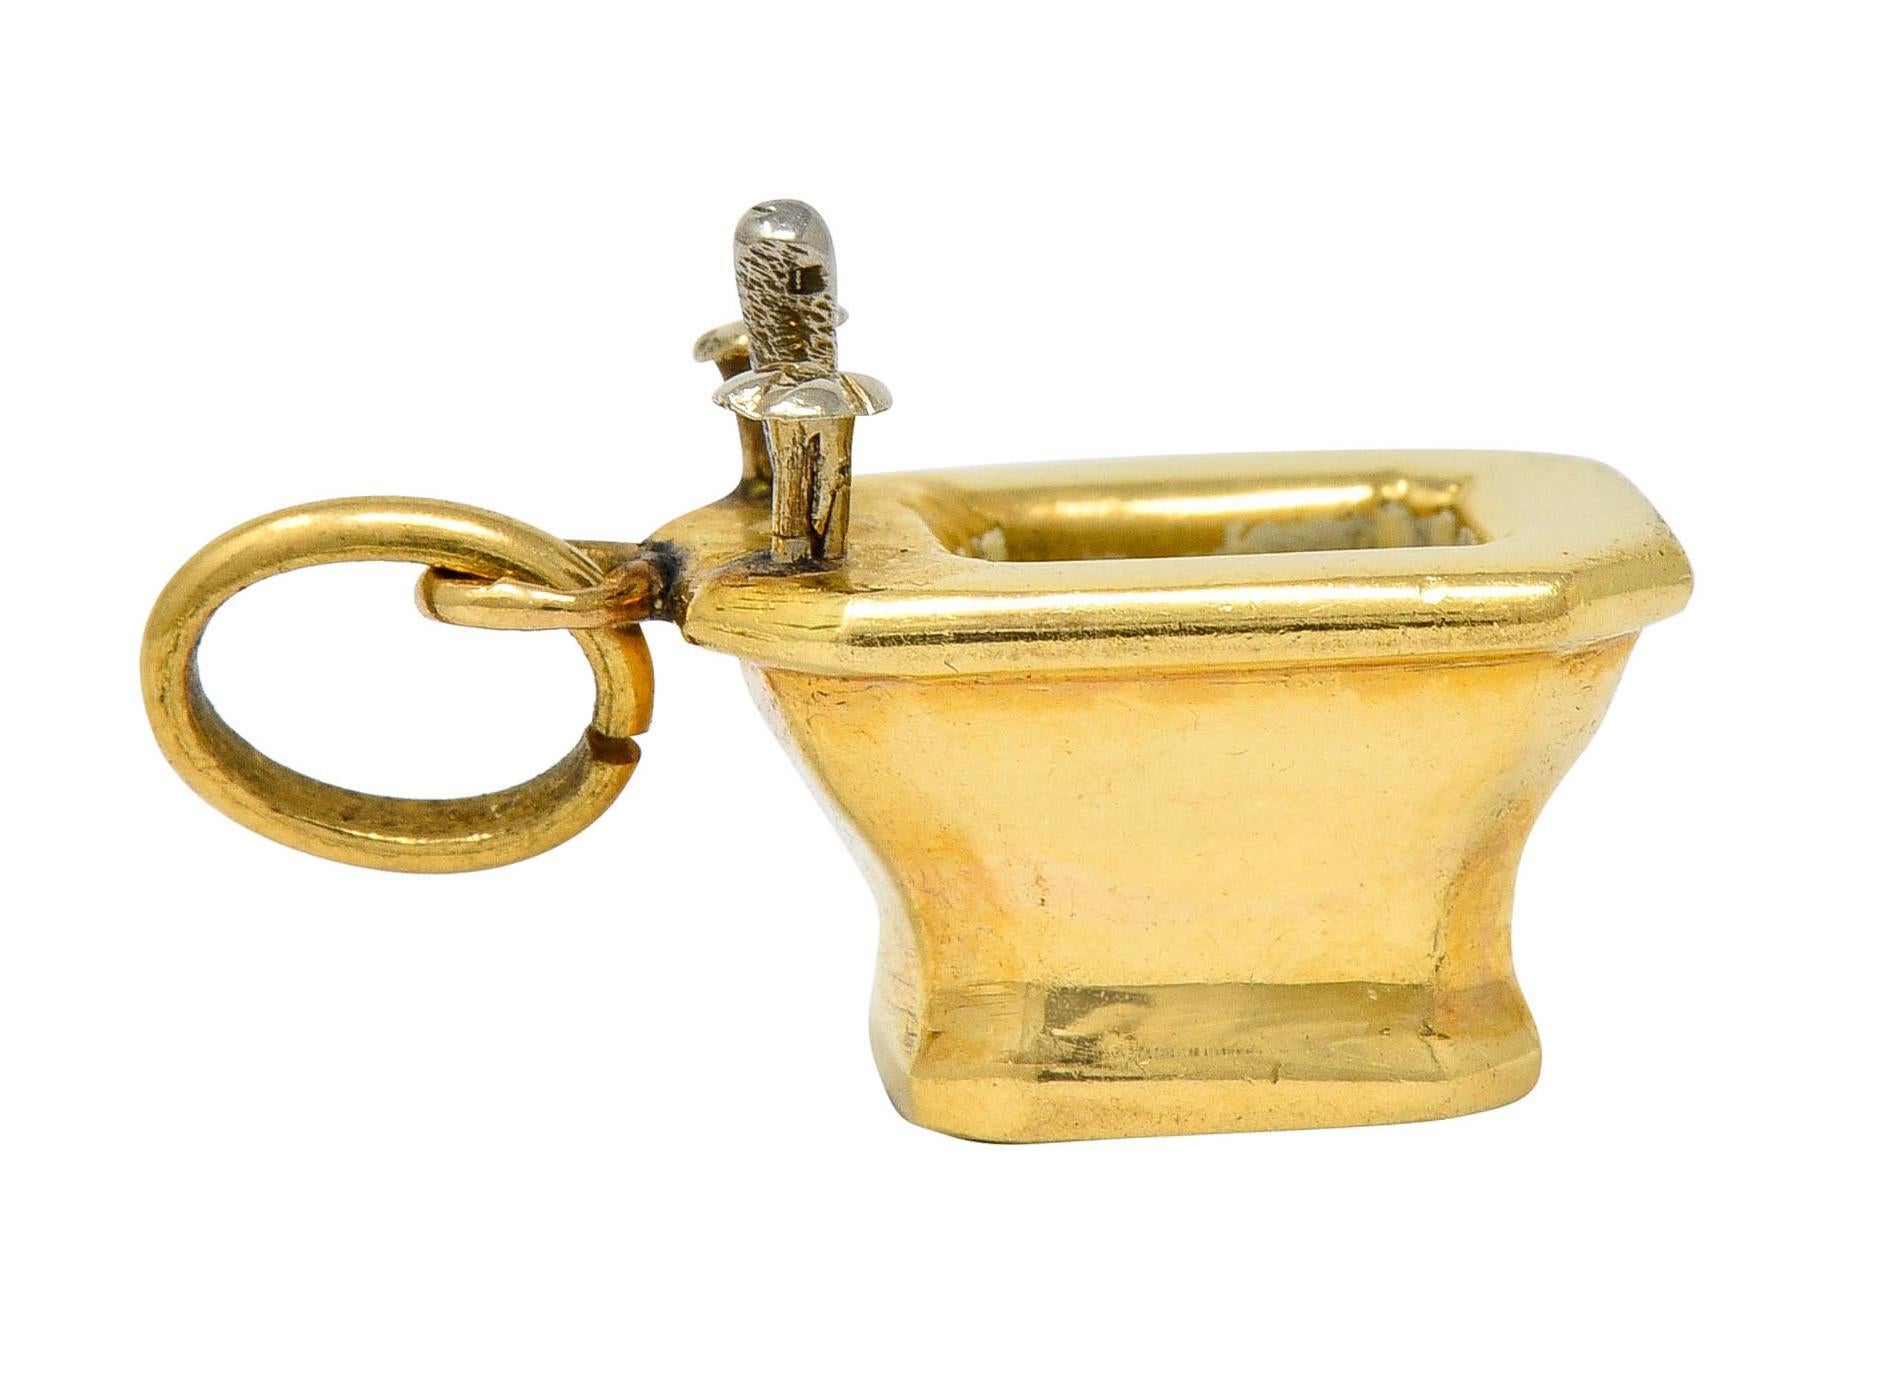 Charm is designed as a polished gold octagonal bidet with a deep cavity and white gold accents
Cavity is glossed with off-white enamel, exhibiting no loss
Completed by a jump ring bale
With French assay marks for 18 karat white gold
Circa: